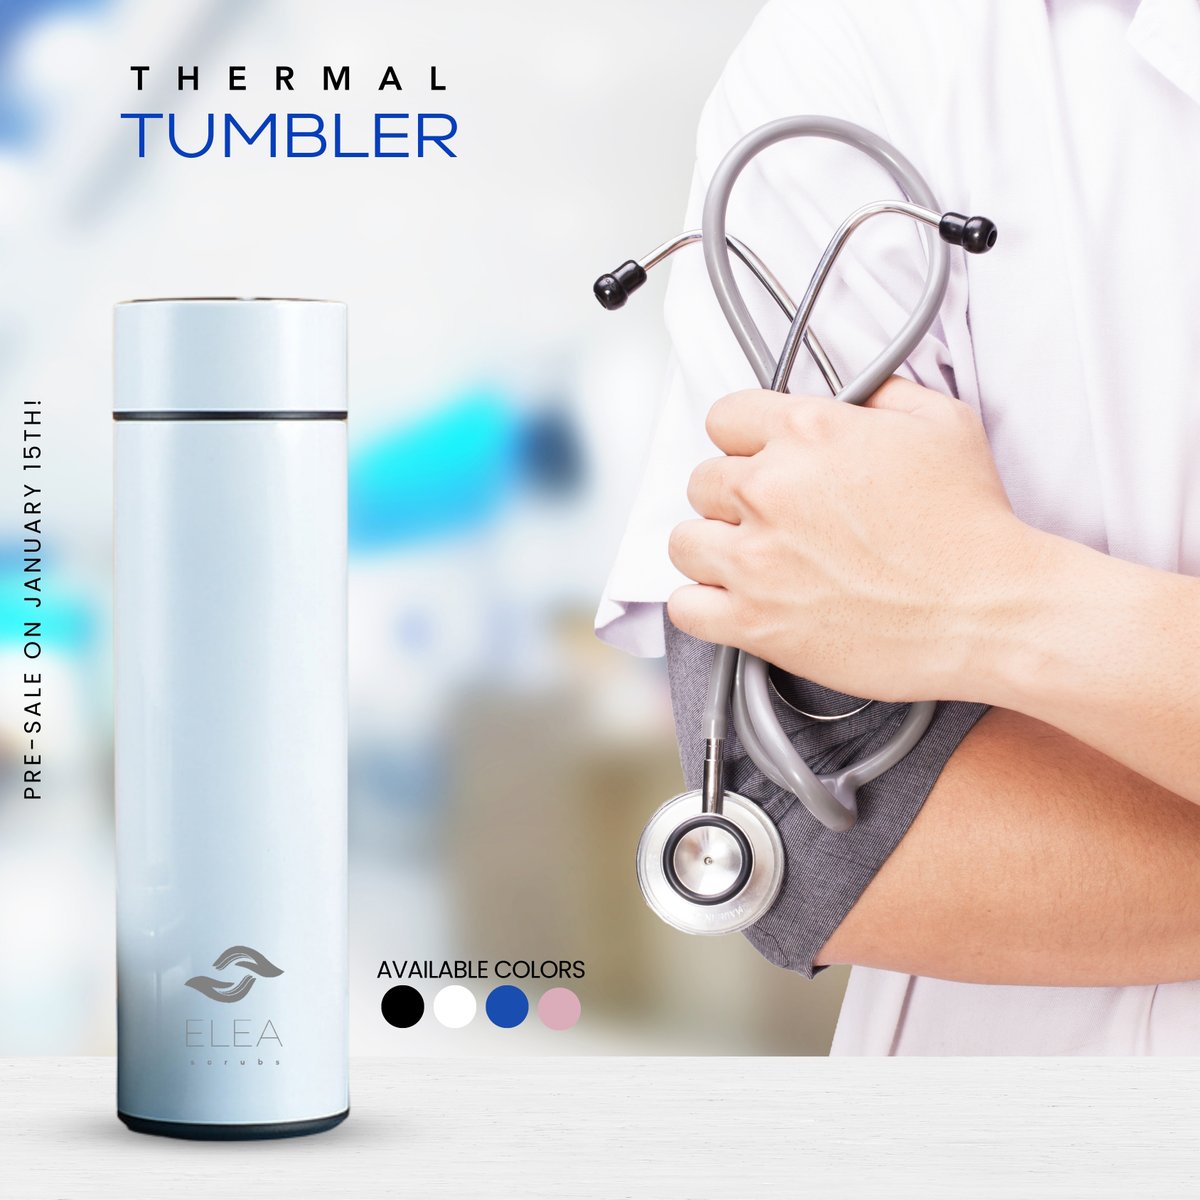 Introducing our Thermal Tumbler - WHITE edition! 📷 ⠀ Presale Begins January 15: Be among the first to secure your Thermal Tumbler! #thermaltumbler #onthegoessentials #tumbleradventures #stylishsips #tumblerupgrade #medical #beverage #coffee #tumblerlife #thermal #tumbler